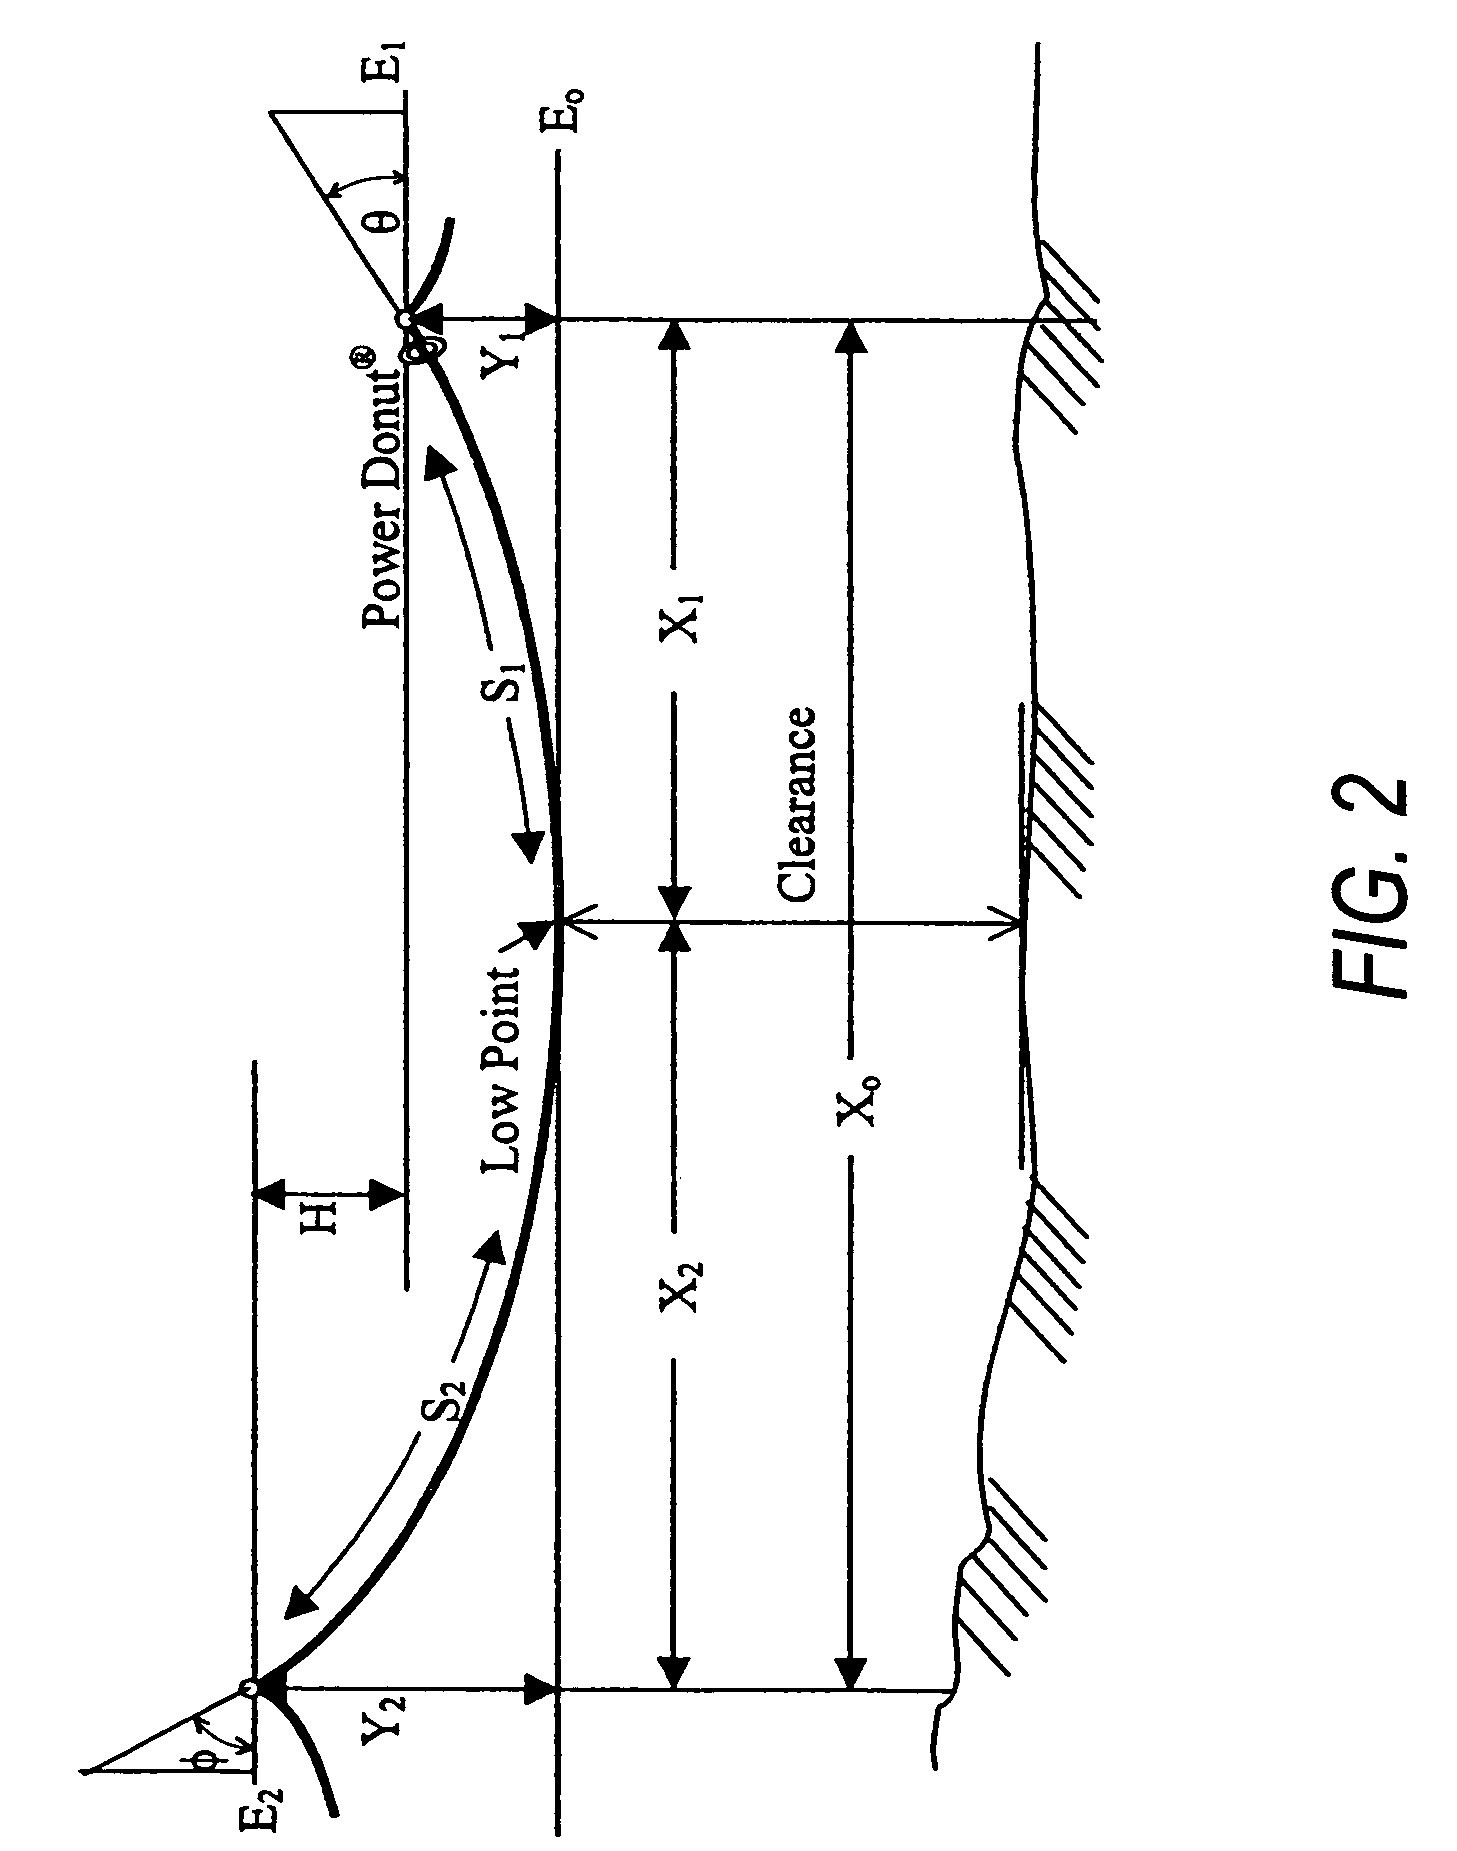 Dynamic line rating system with real-time tracking of conductor creep to establish the maximum allowable conductor loading as limited by clearance